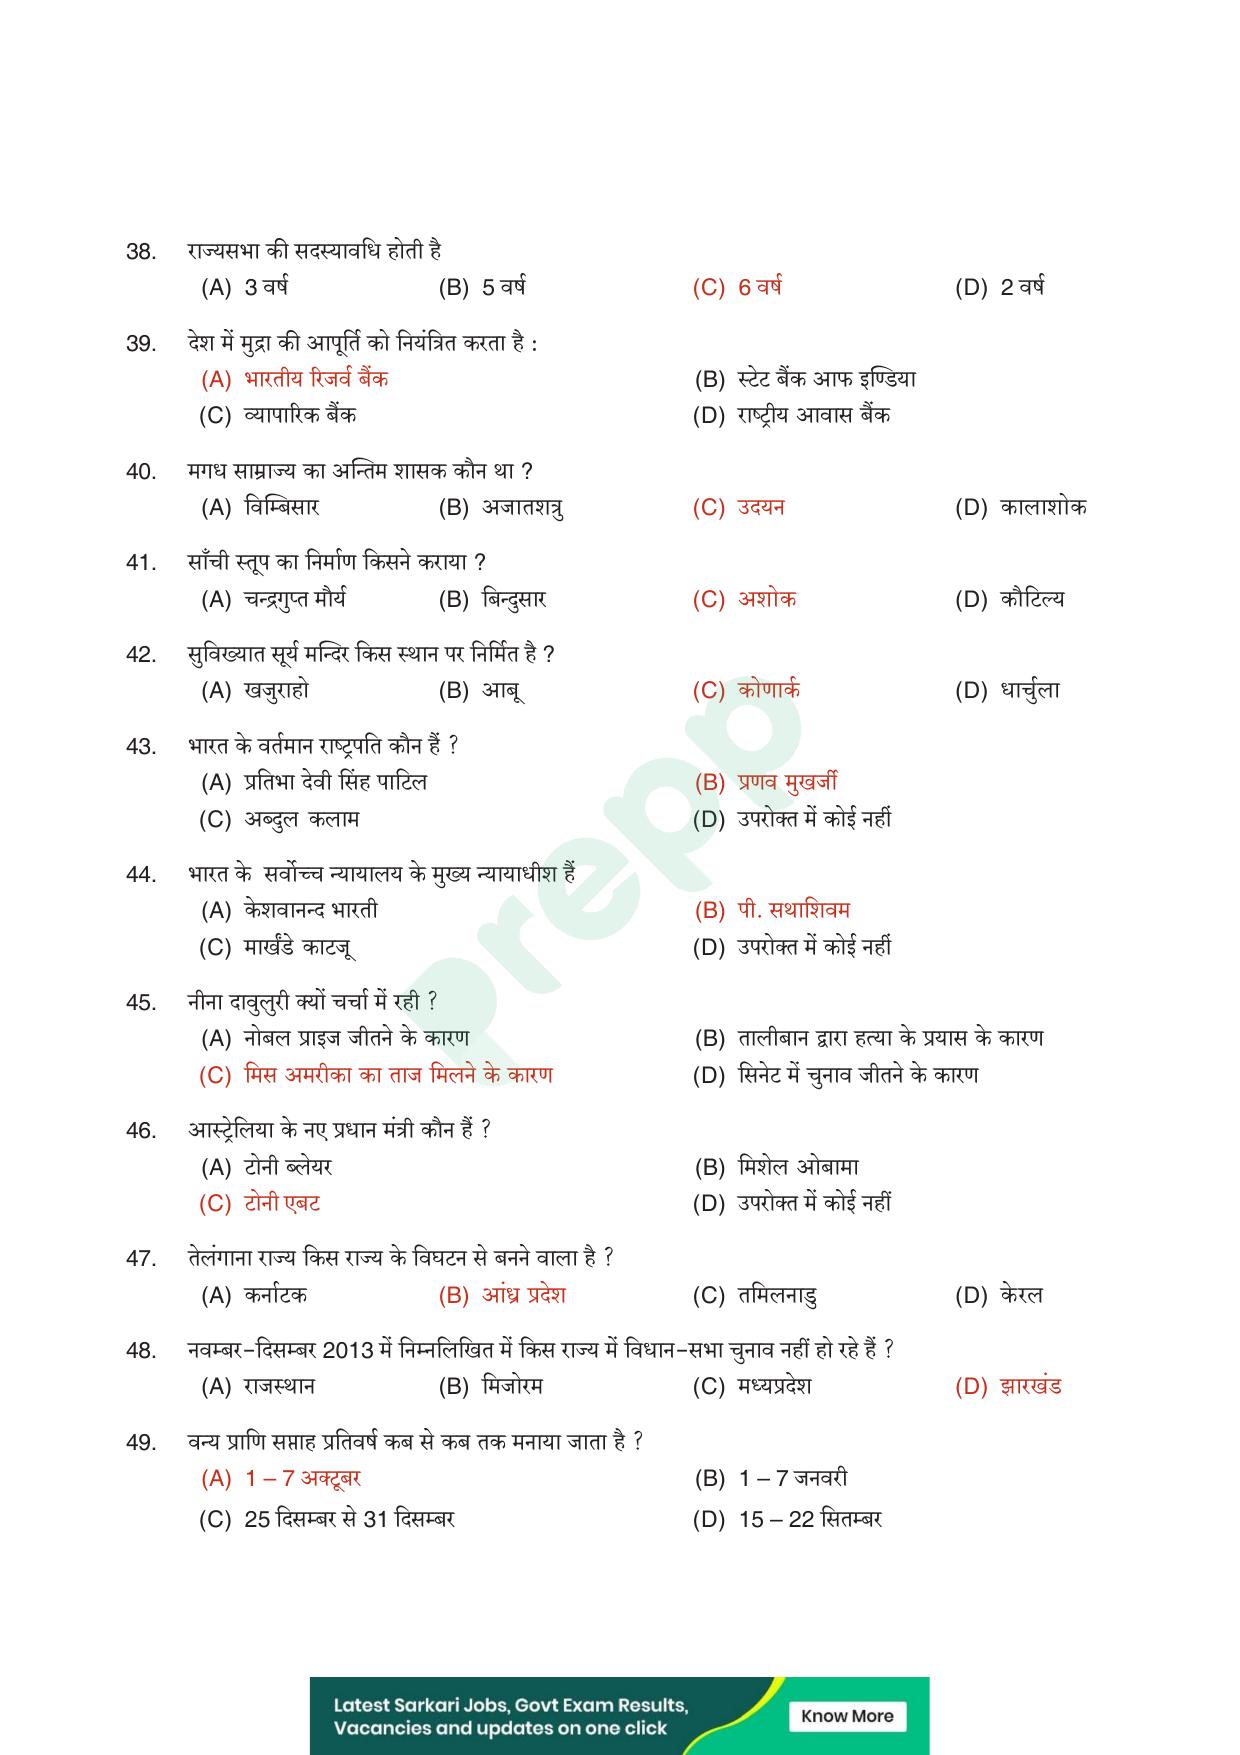 UPPRPB Police Constable Question Papers - Page 12